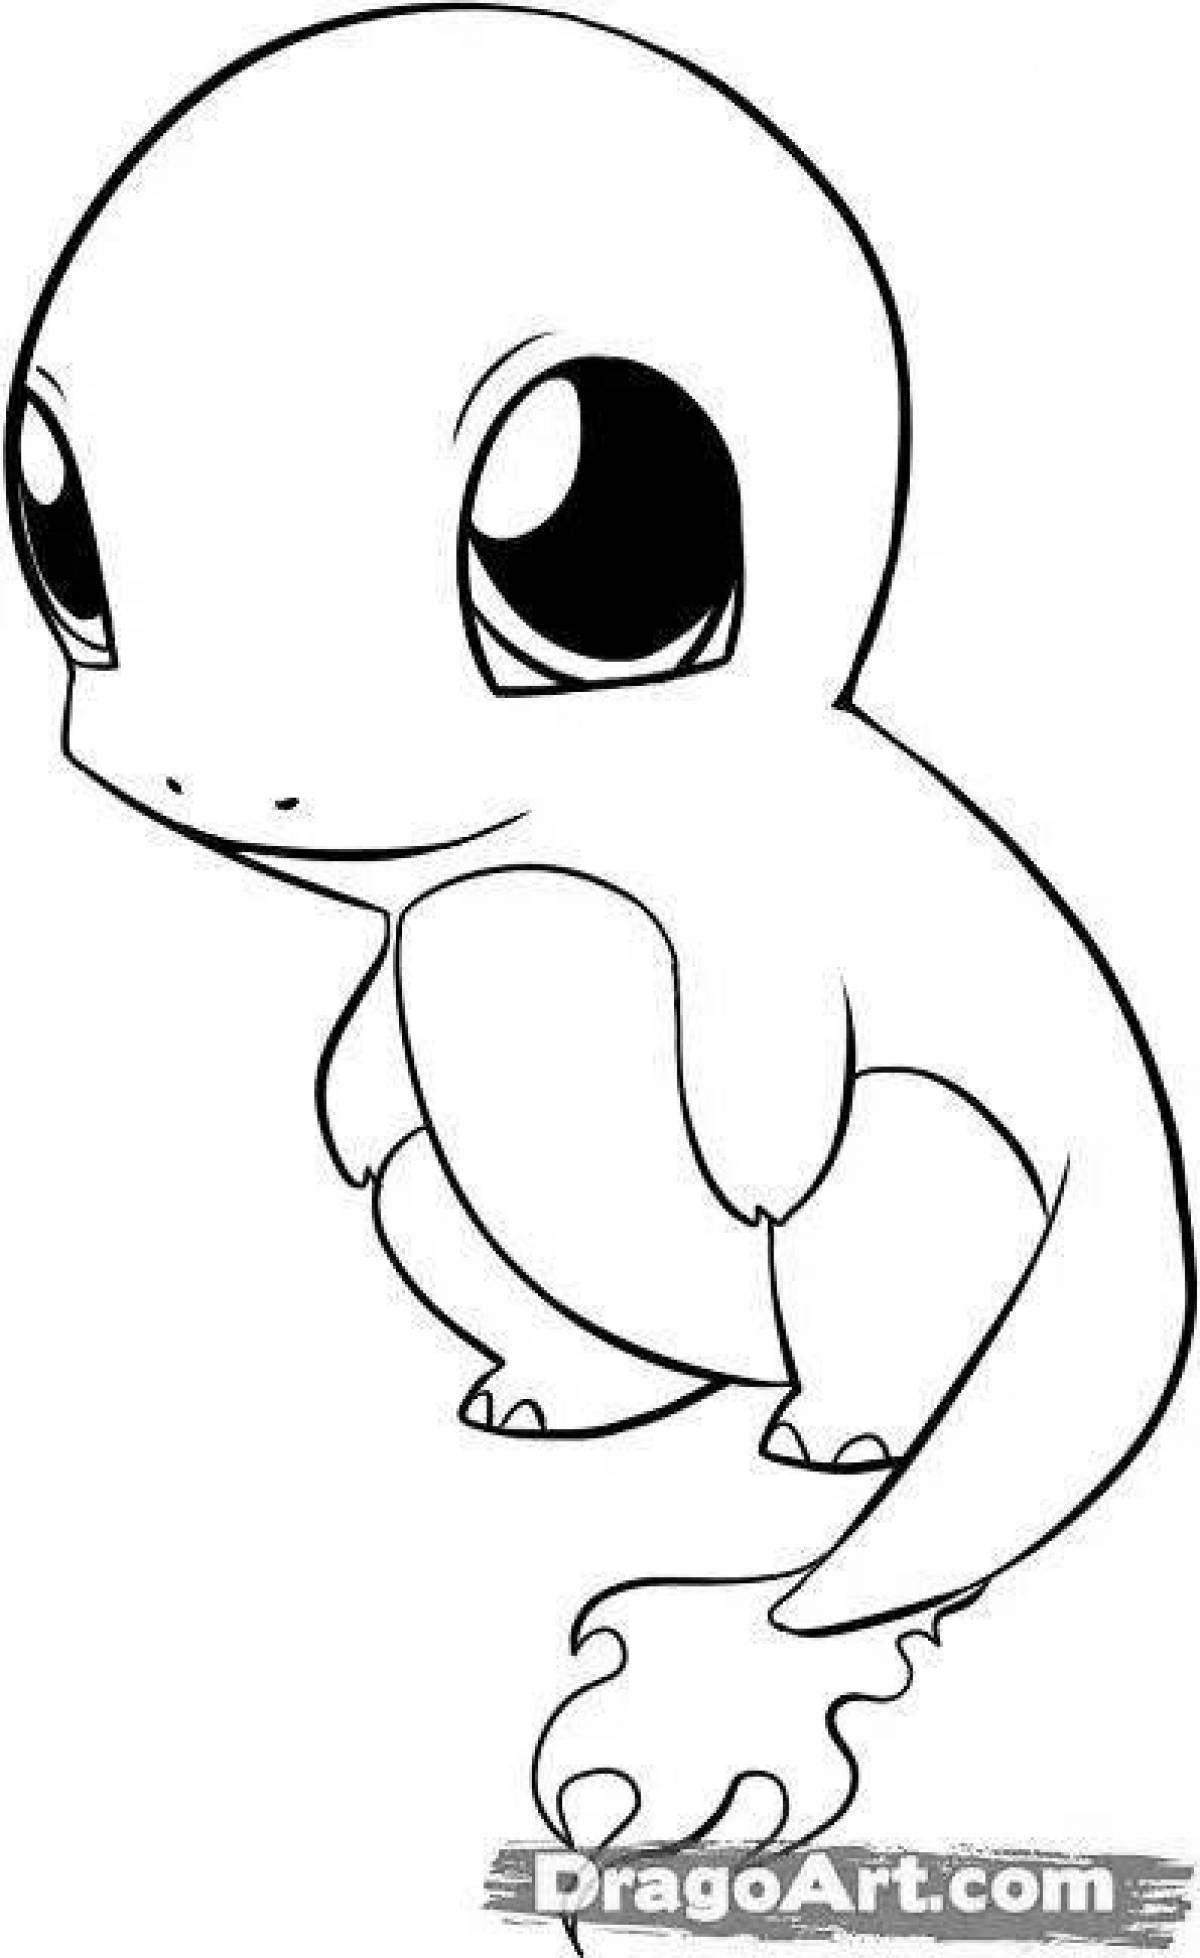 Glorious charmander coloring page